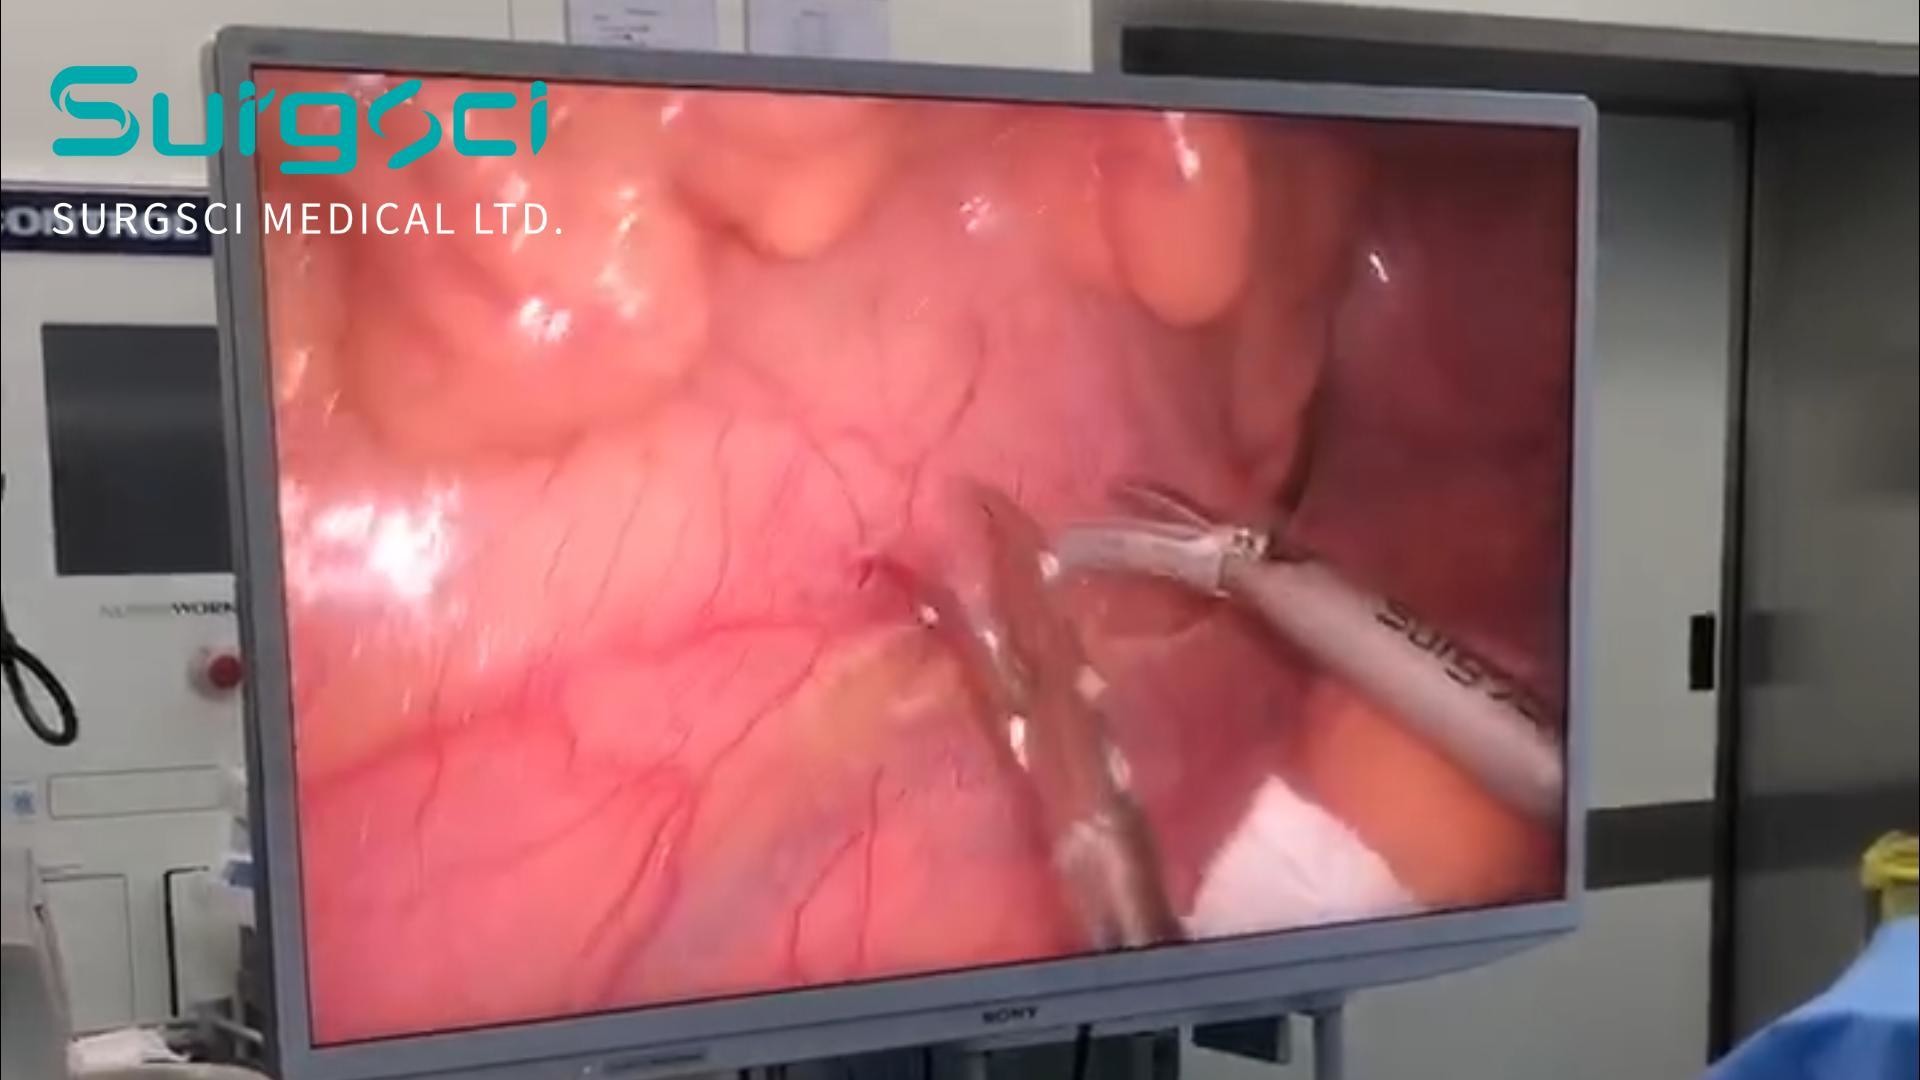 Latest company case about Laparoscopic Radical Resection of Rectal Cancer with Surgsci Ultrasonic Scalpel